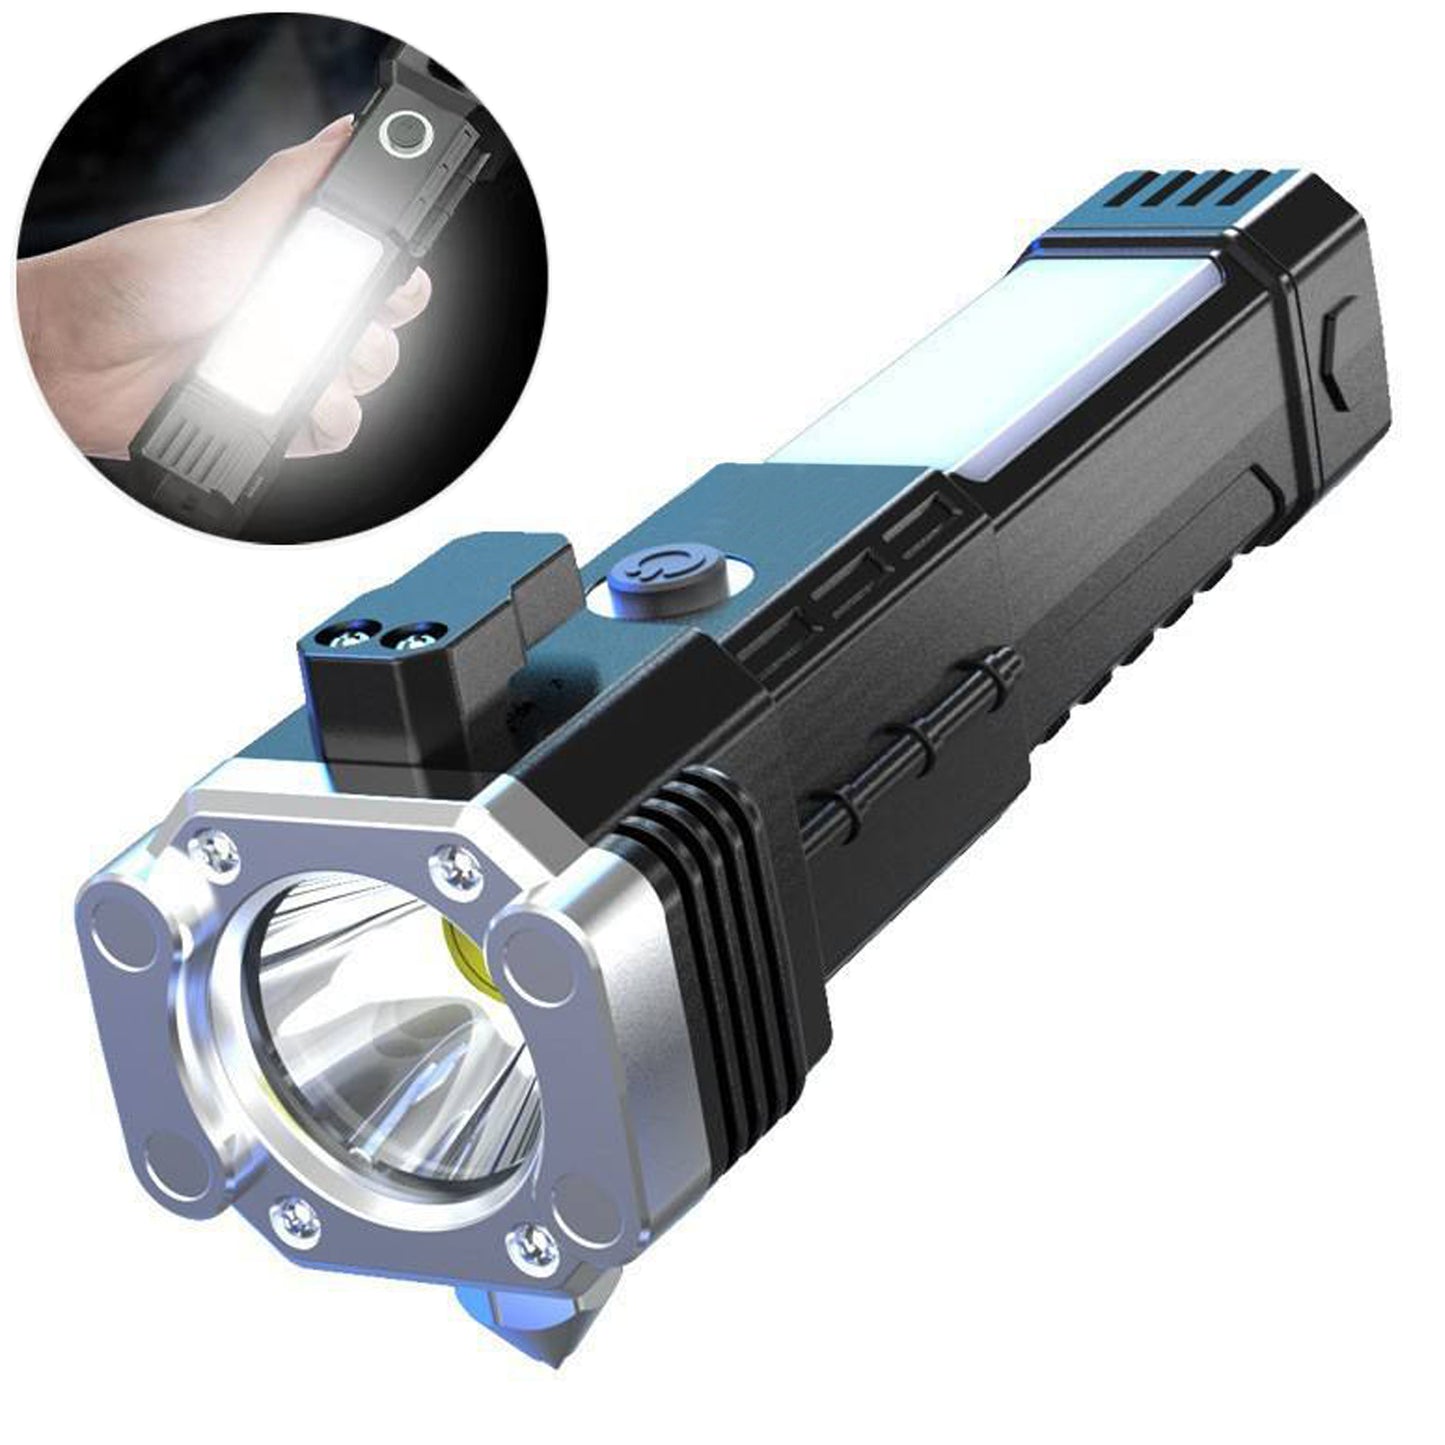 WRADER Safety Car Rescue LED Torch Light, Flashlight COB LED Light with Powerbank Hammer Torch